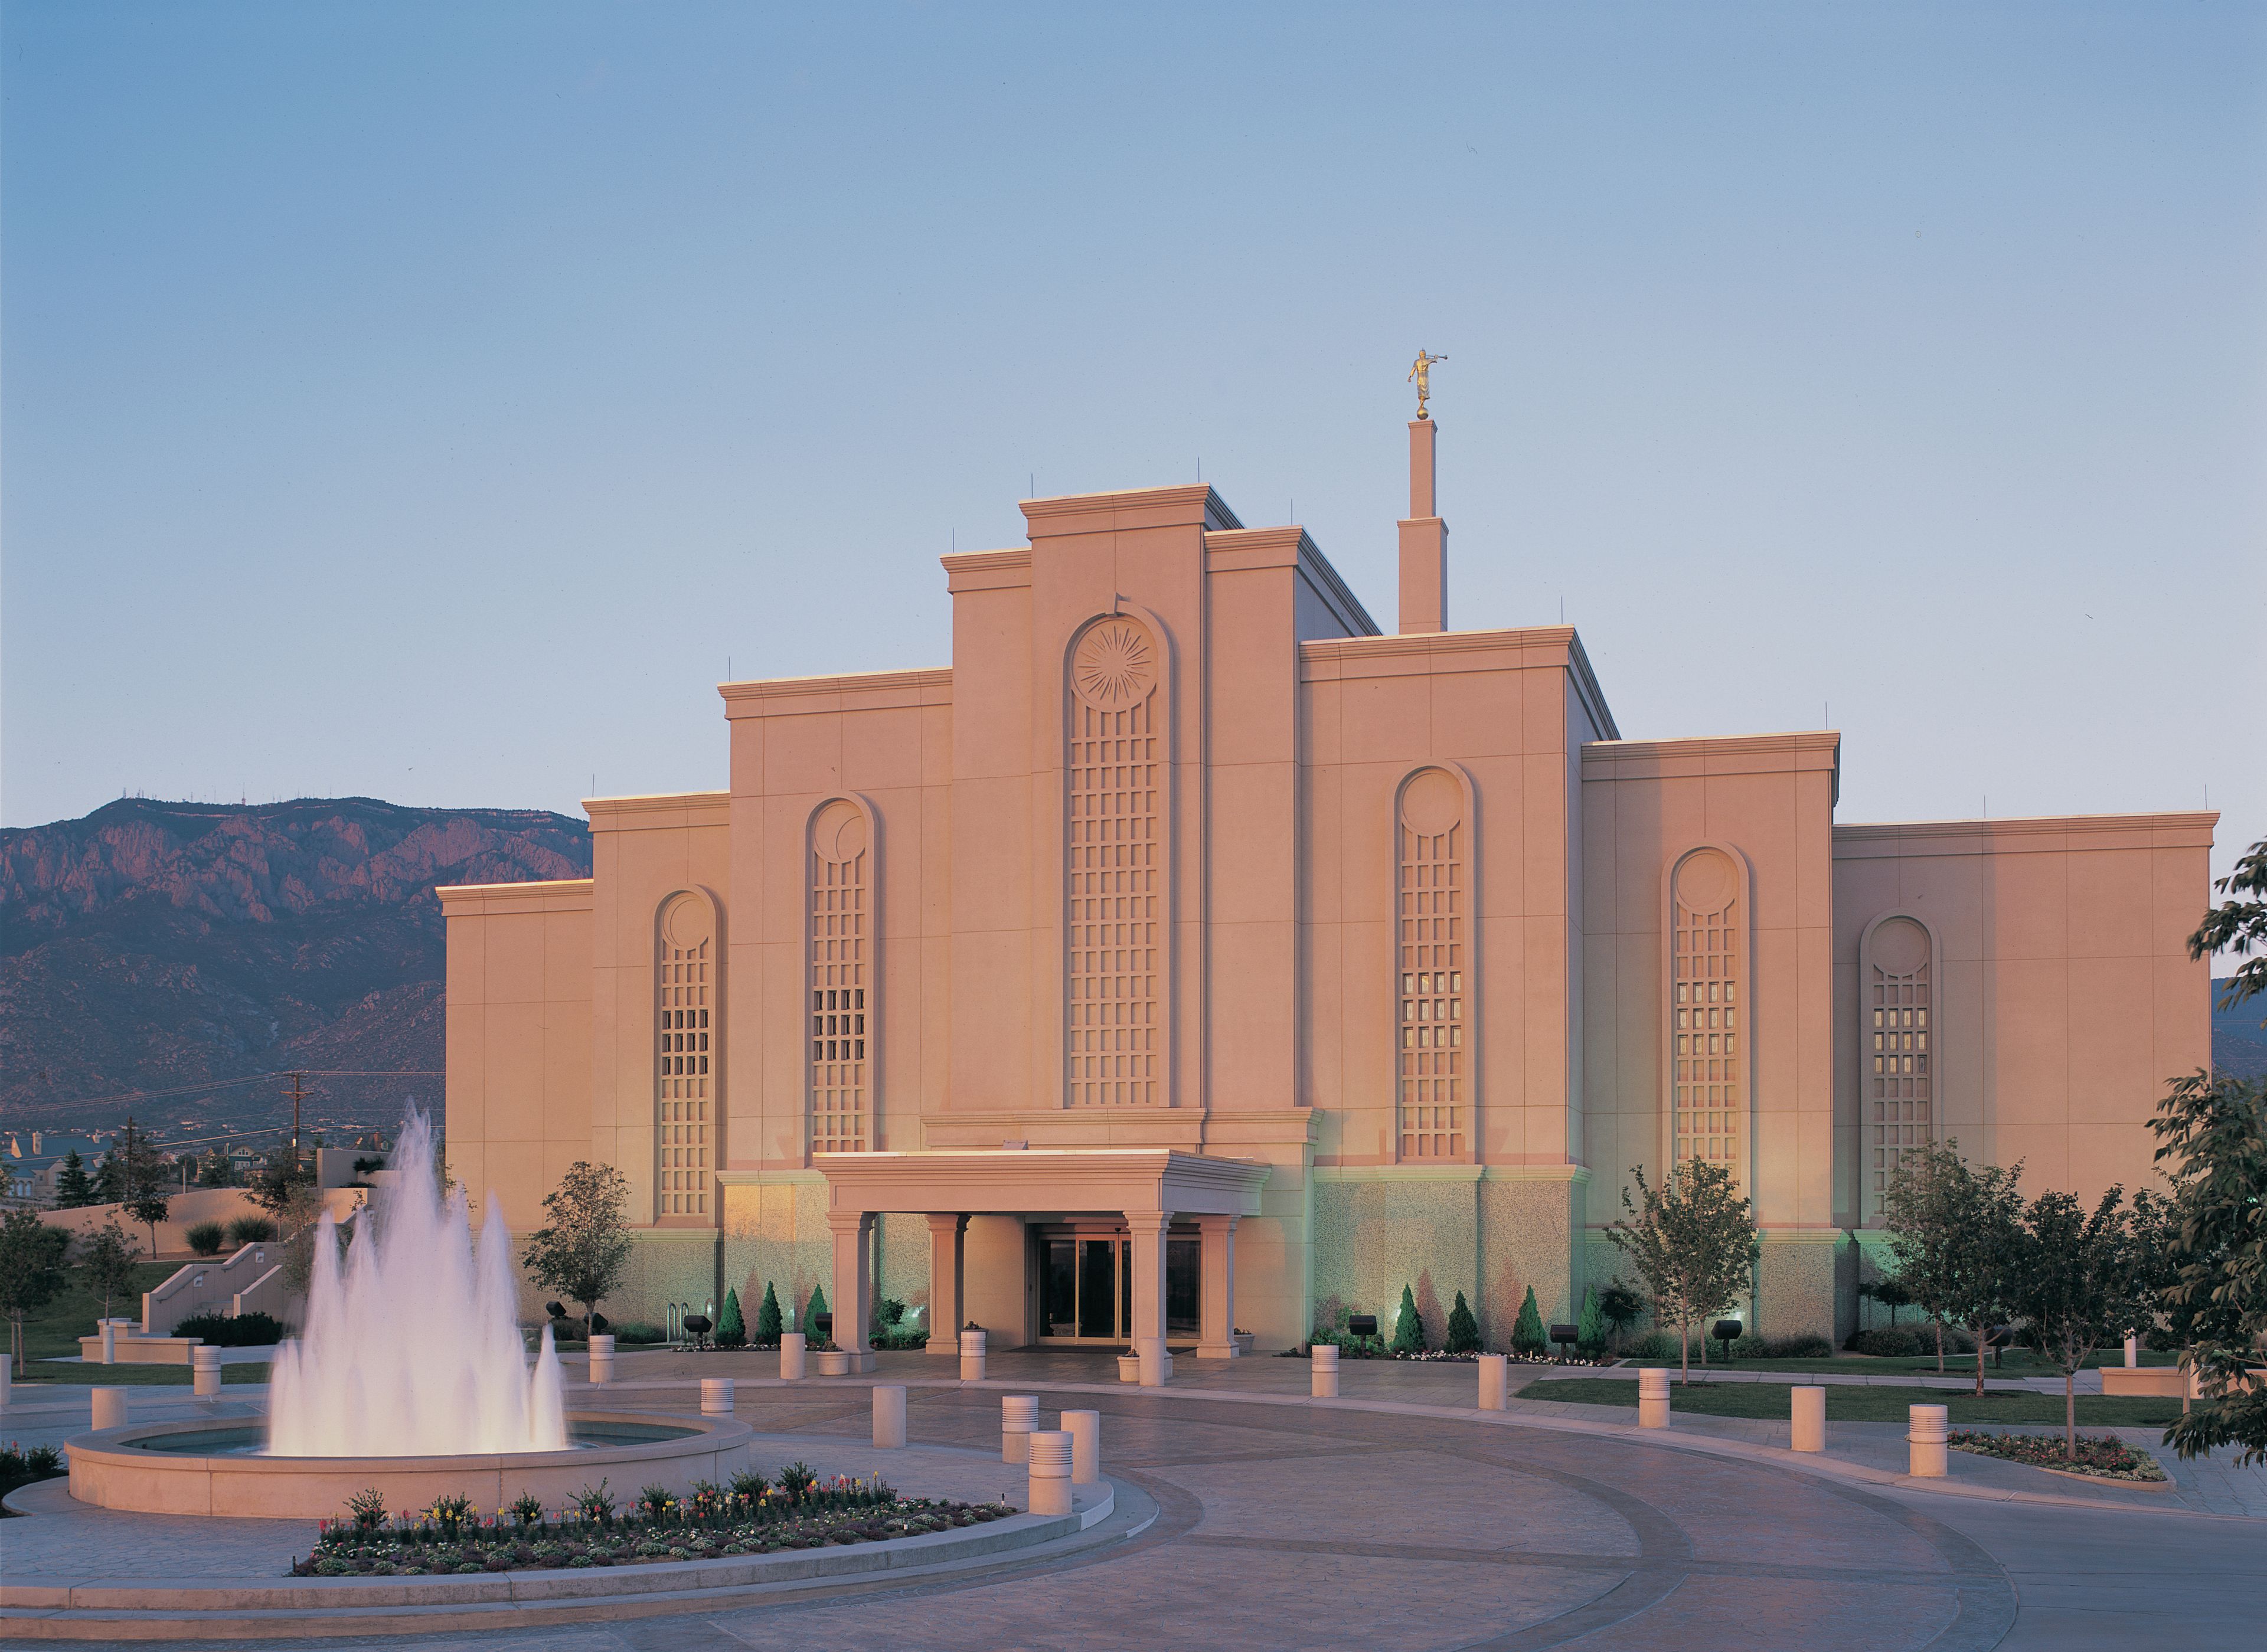 The front entrance of the Albuquerque New Mexico Temple and the fountain in the evening.